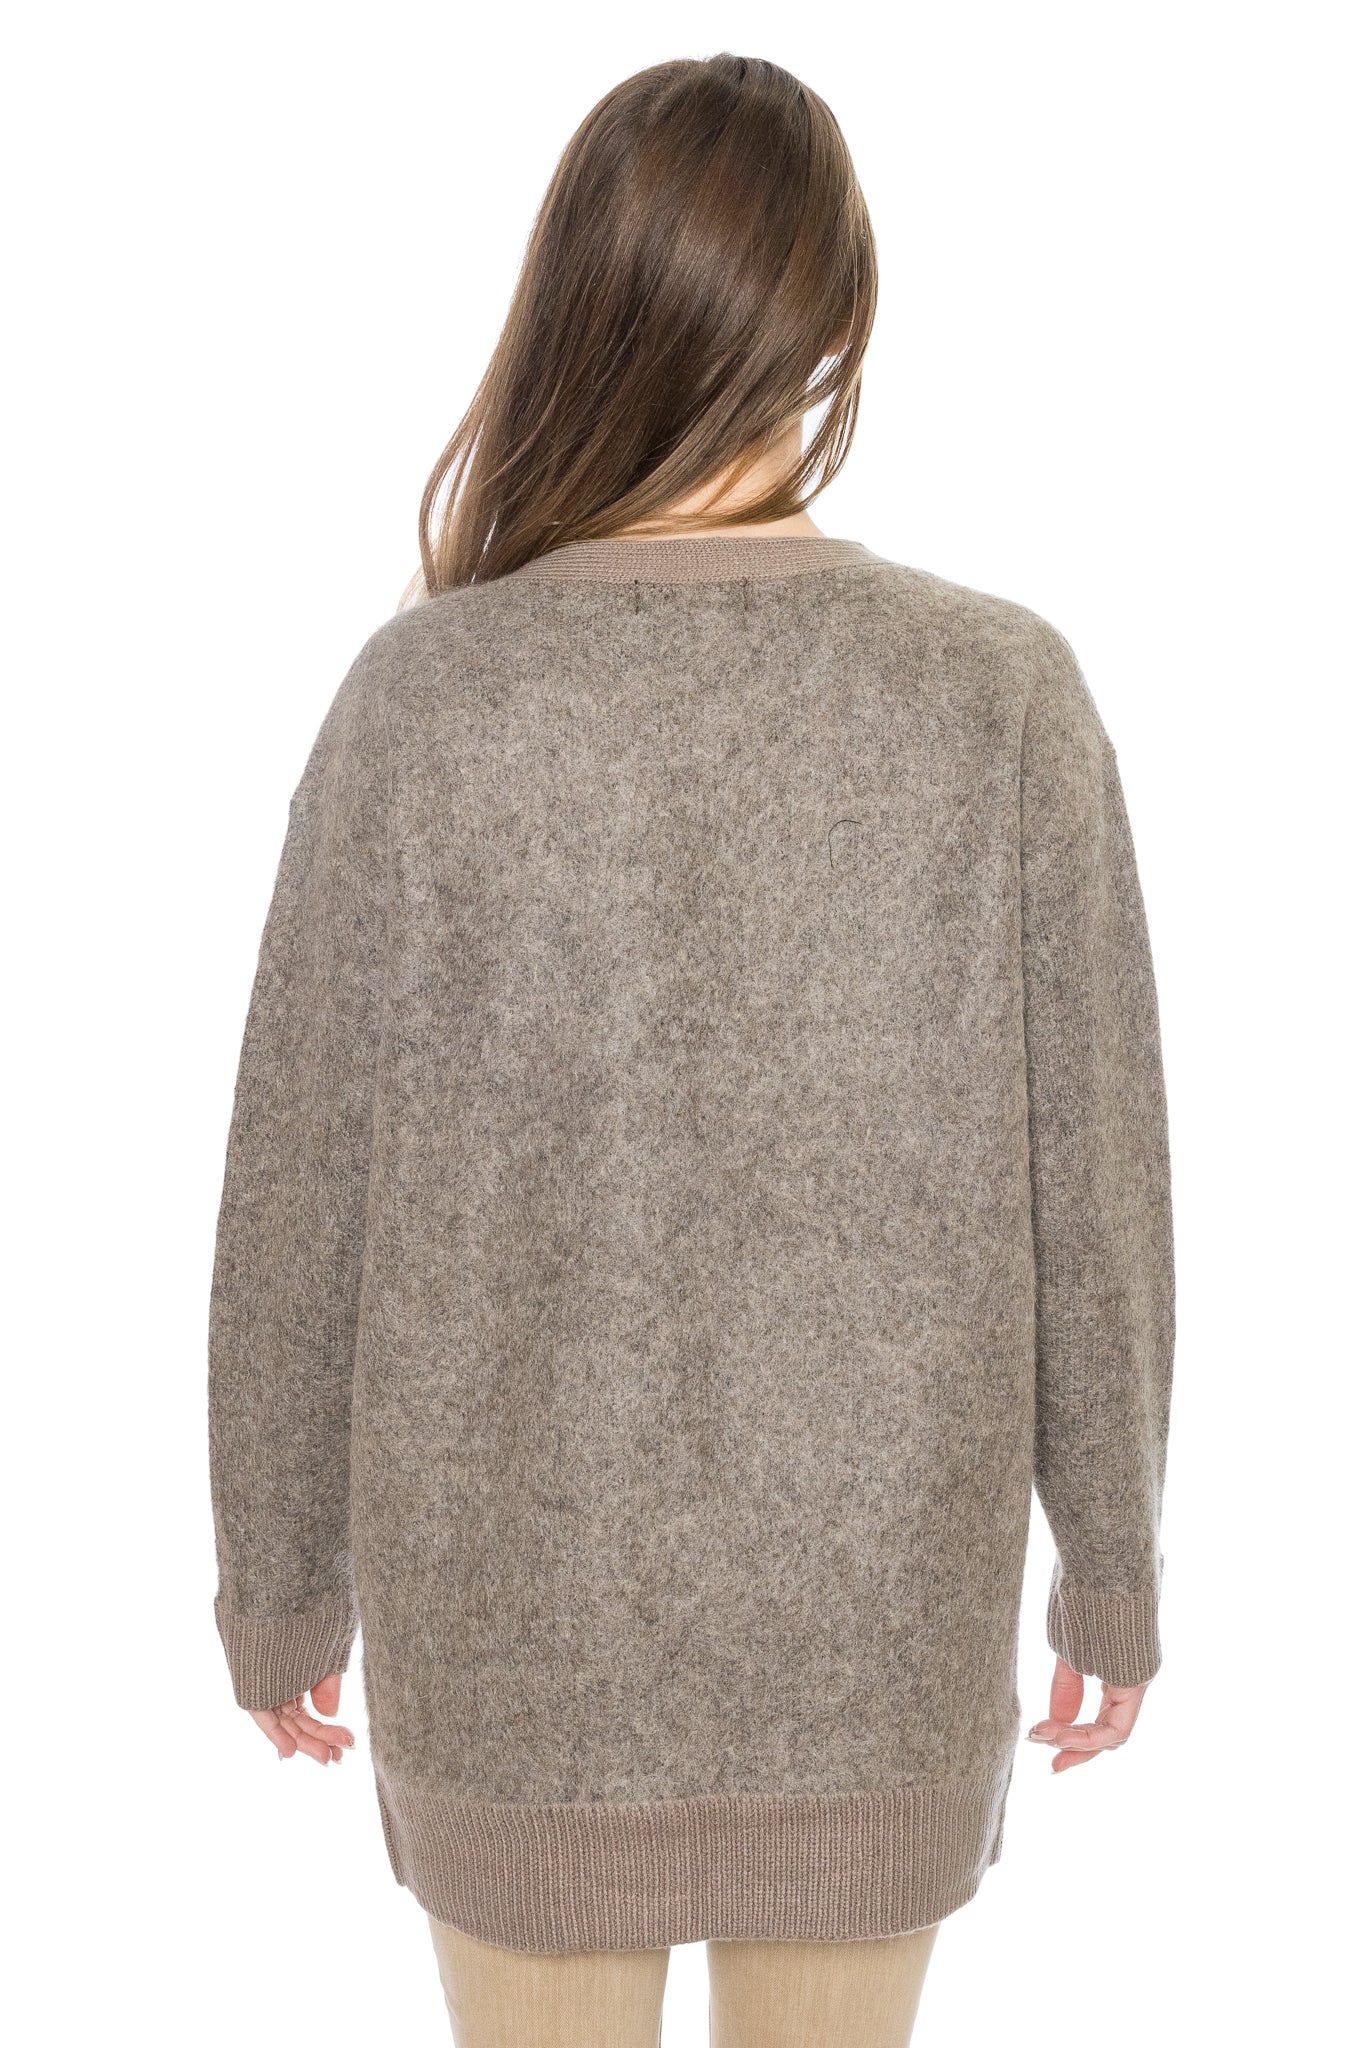 Luna Cardigan by Common Collection